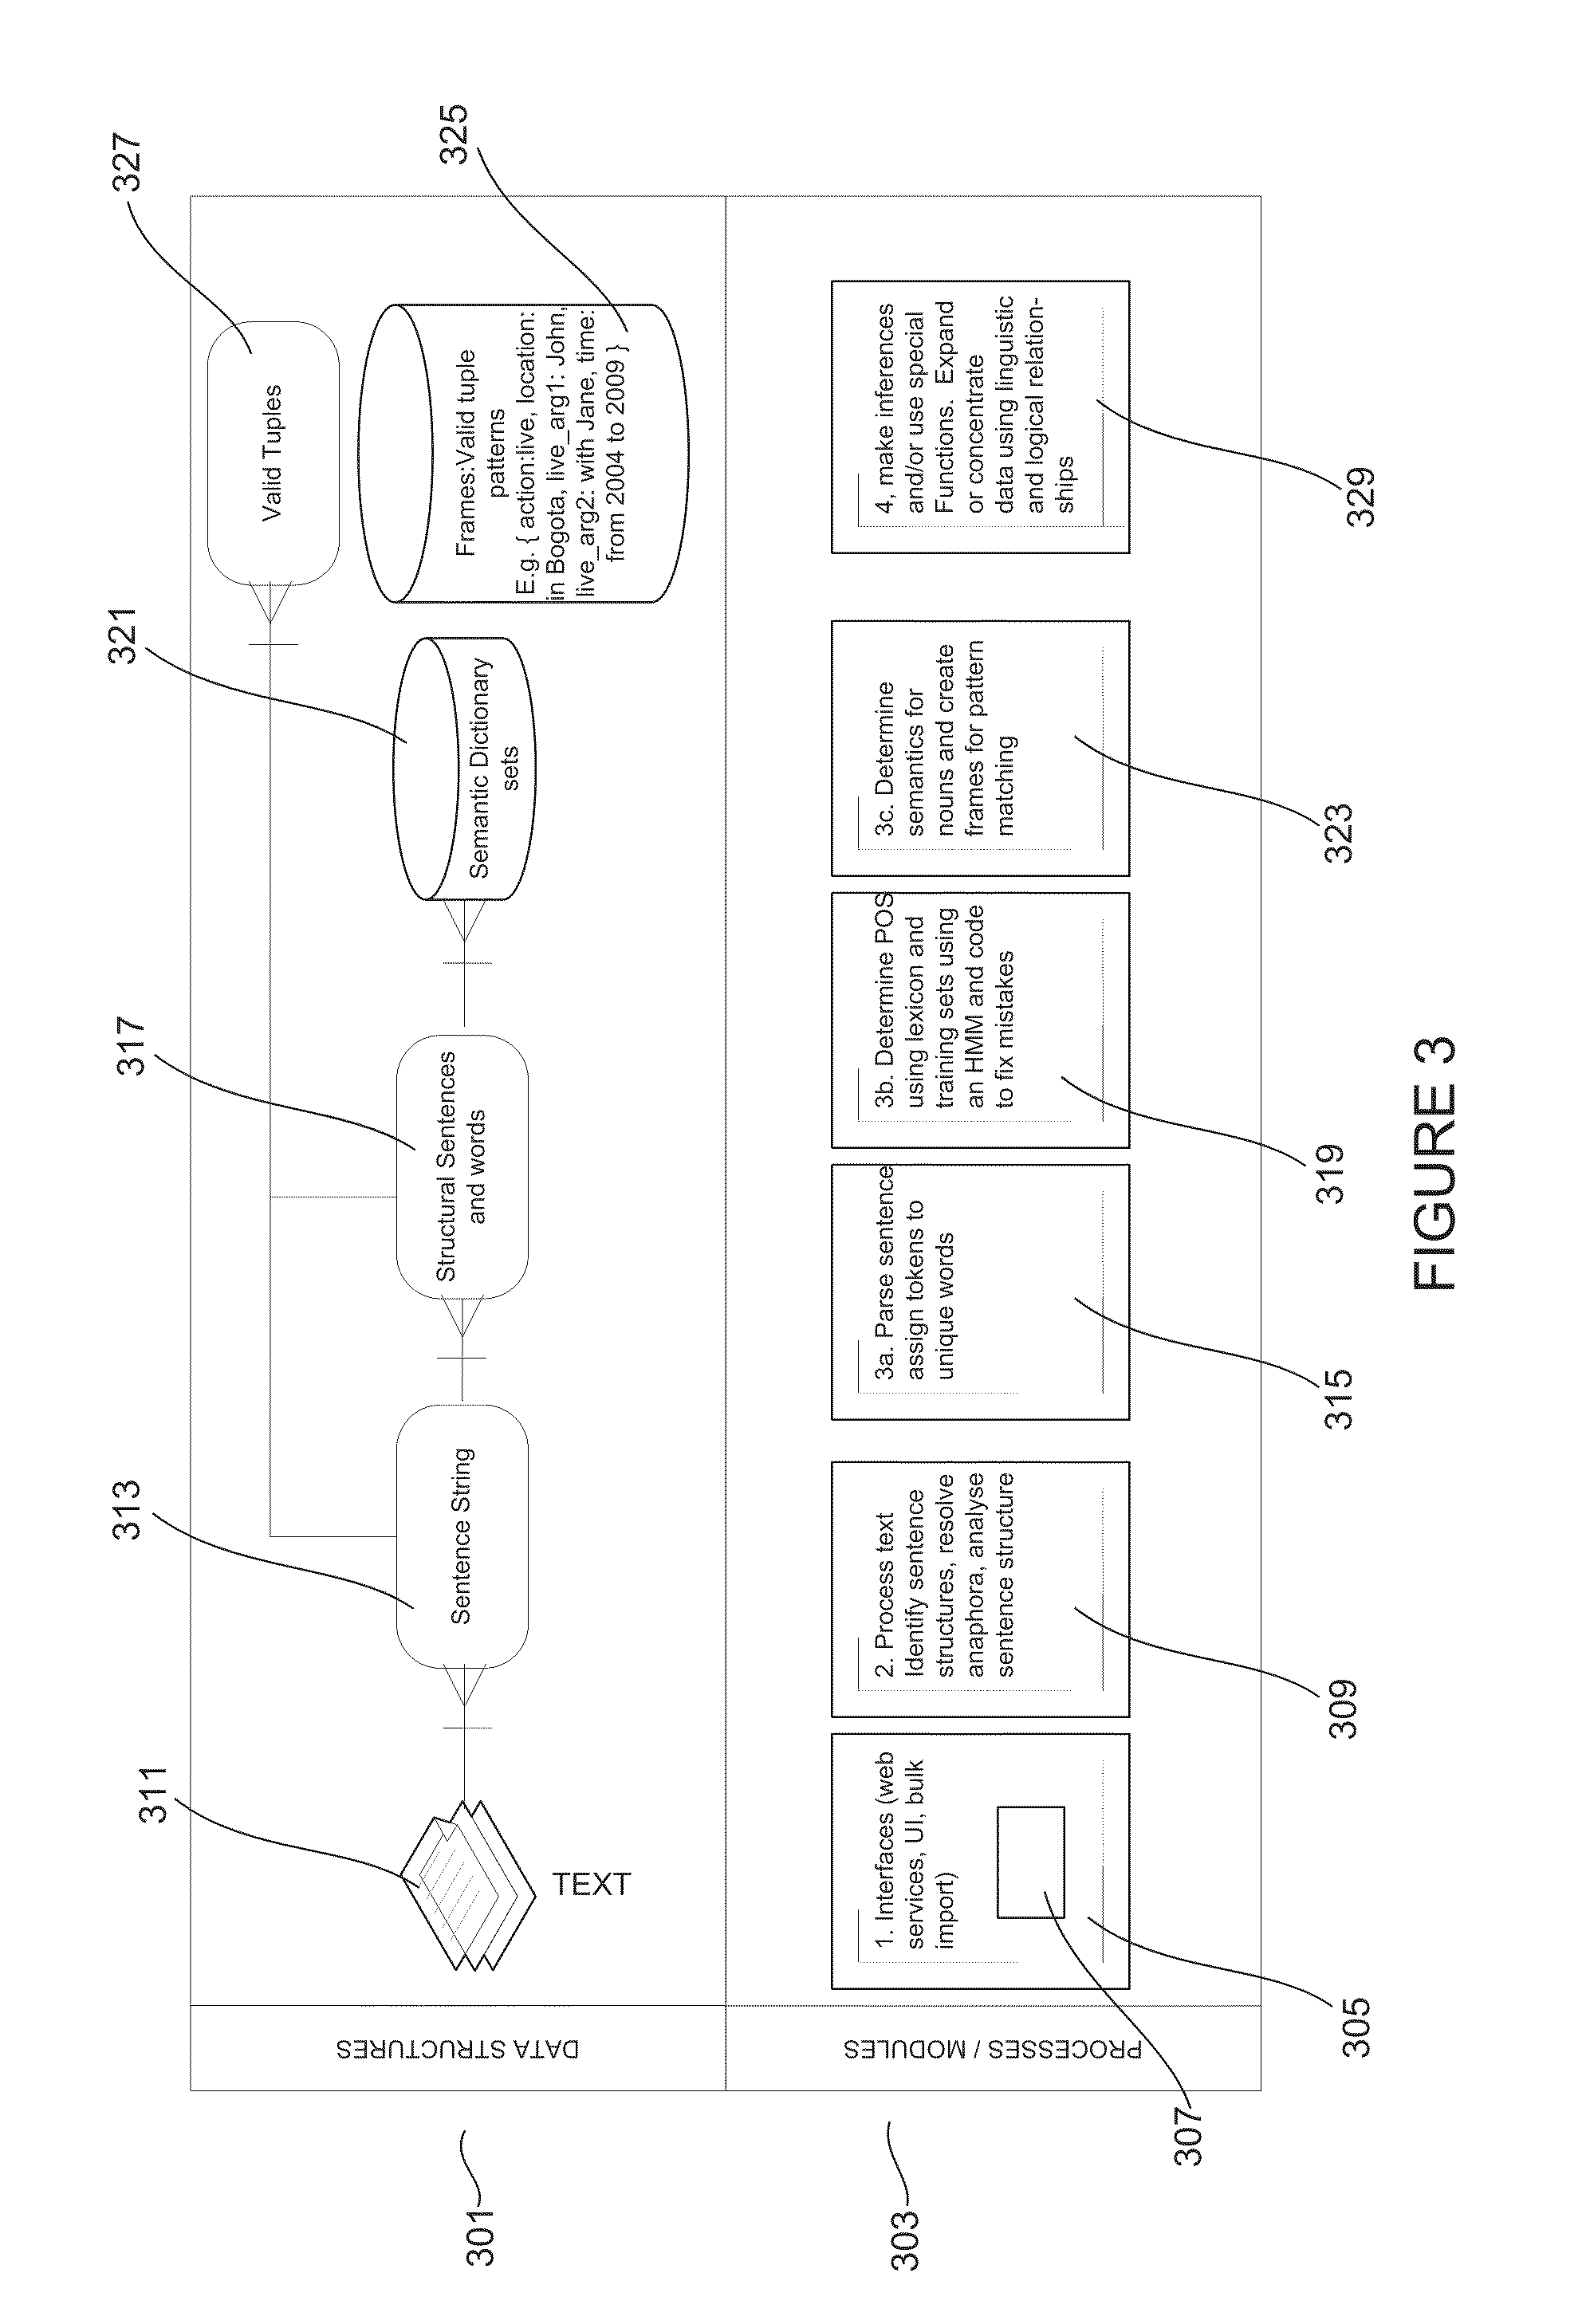 Natural language processing method and system